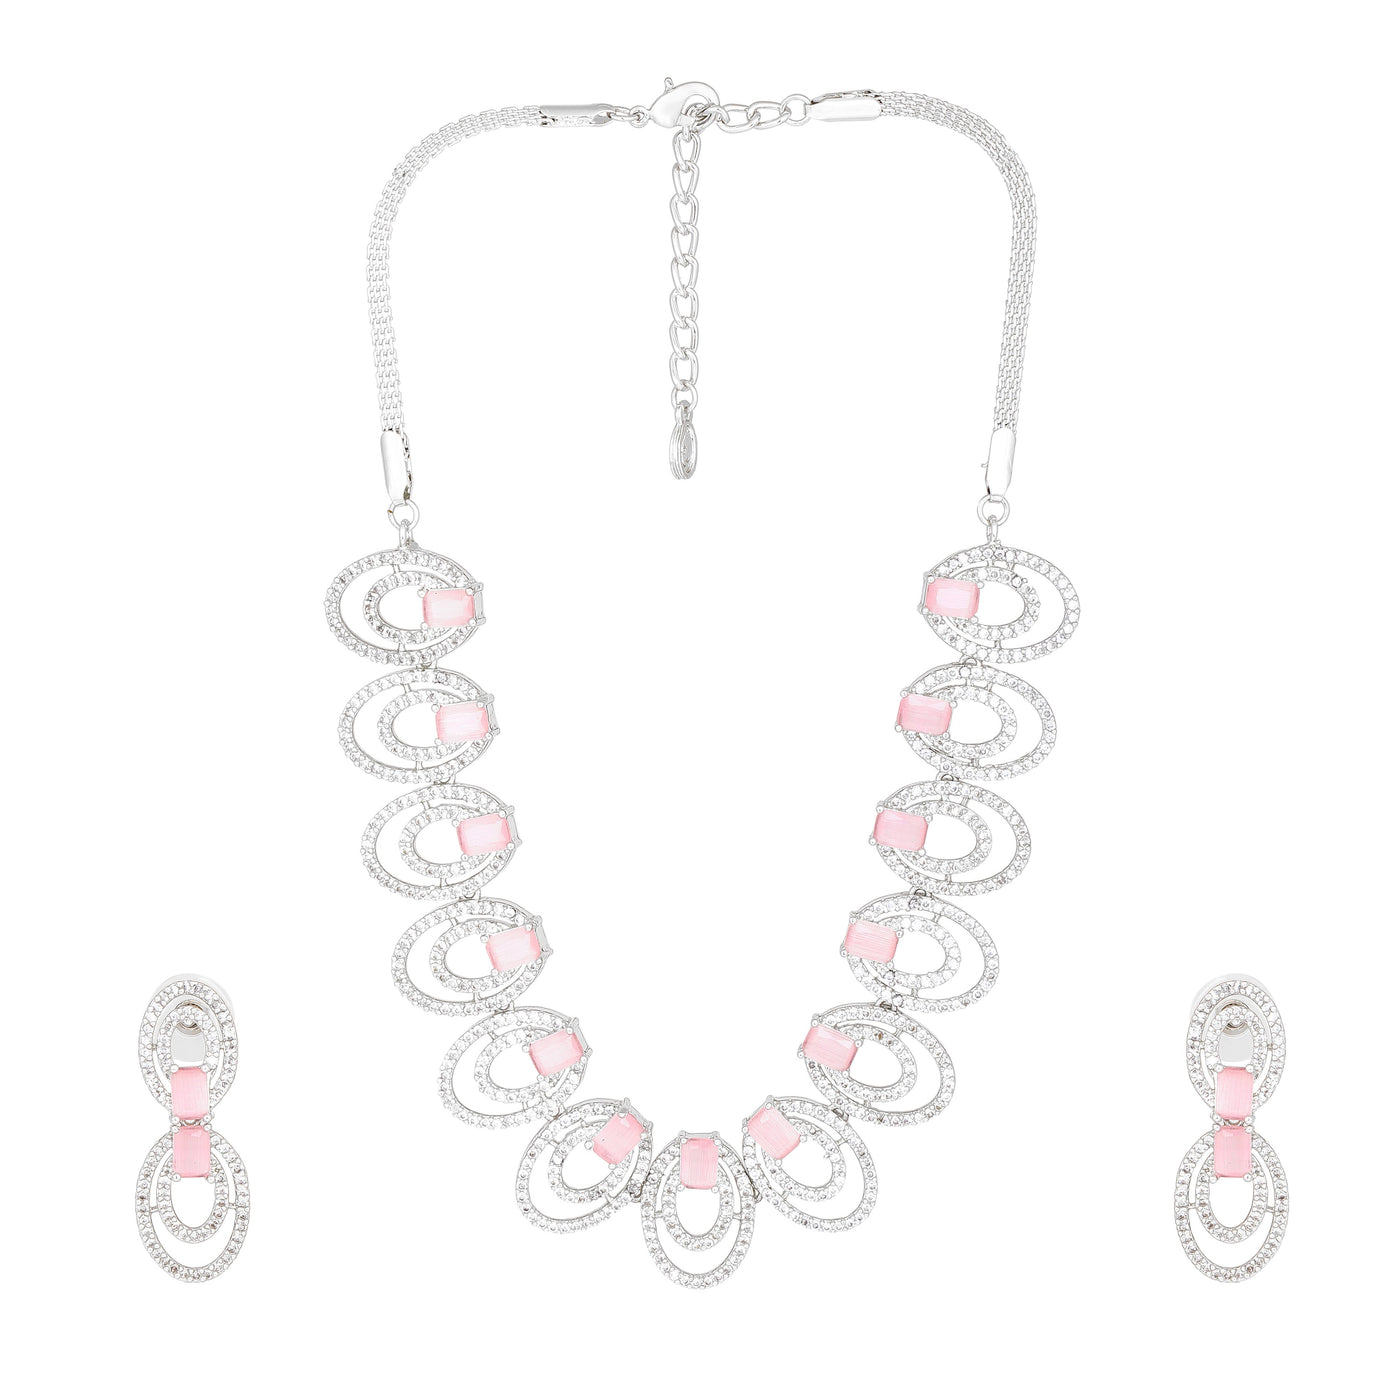 Estele Rhodium Plated CZ Circular Designer Necklace Set with Mint Pink Crystals for Women